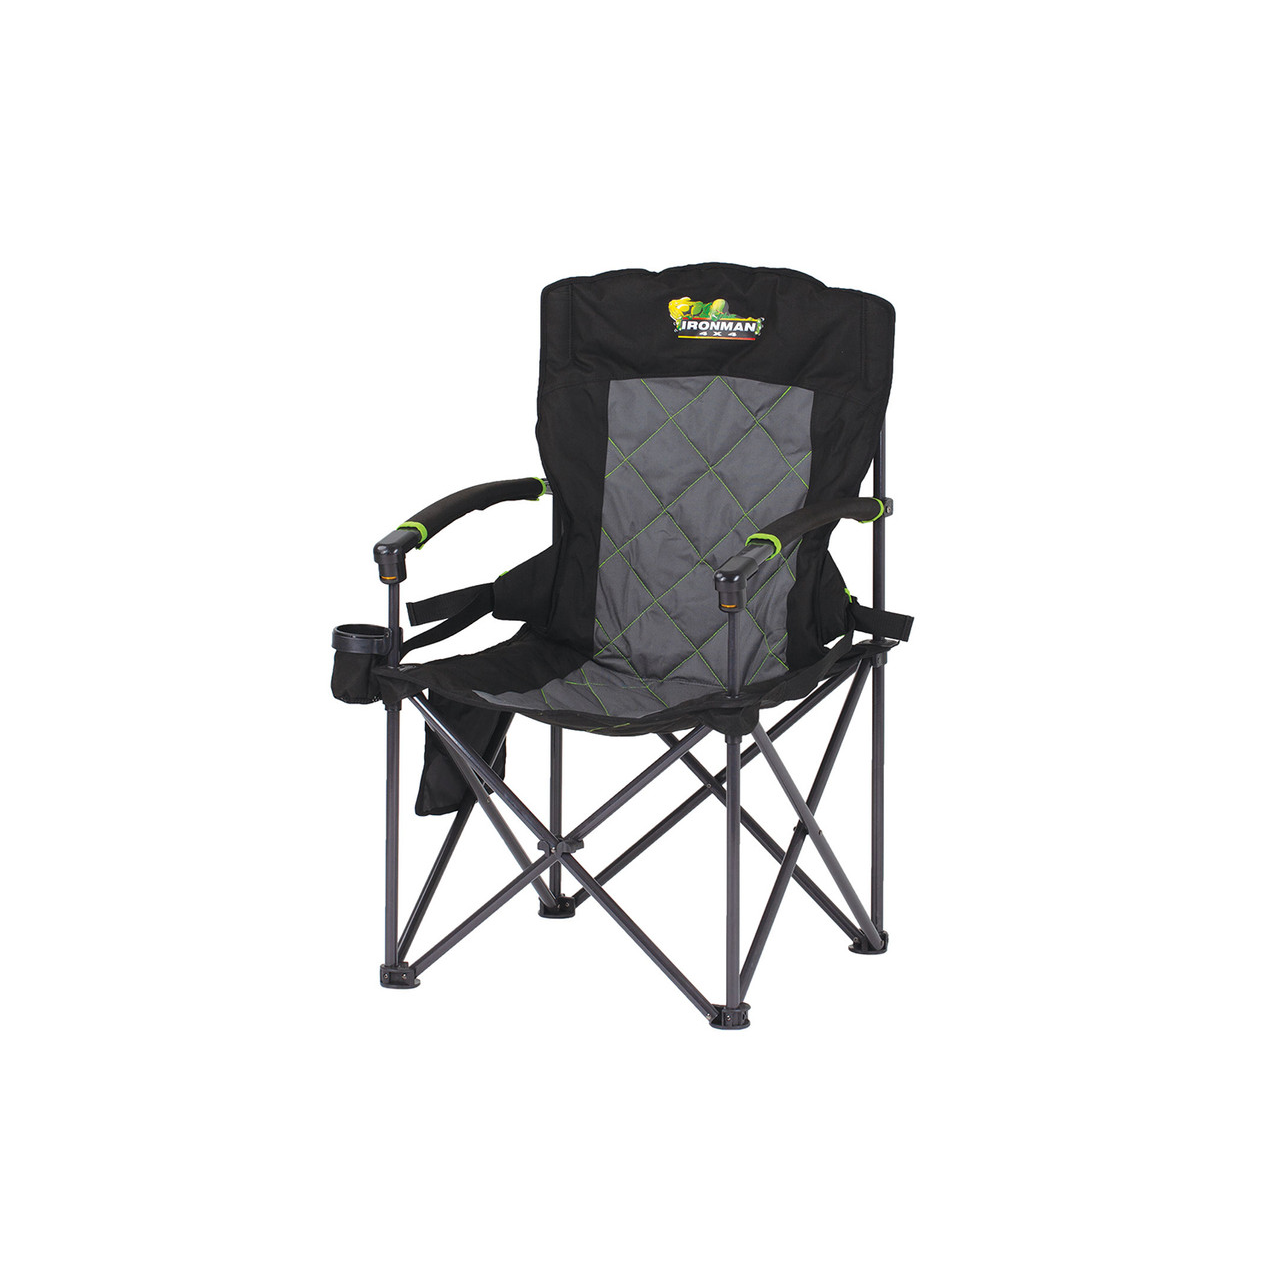 KING HARD ARM CAMP CHAIR WITH LUMBAR SUPPORT (200KG)